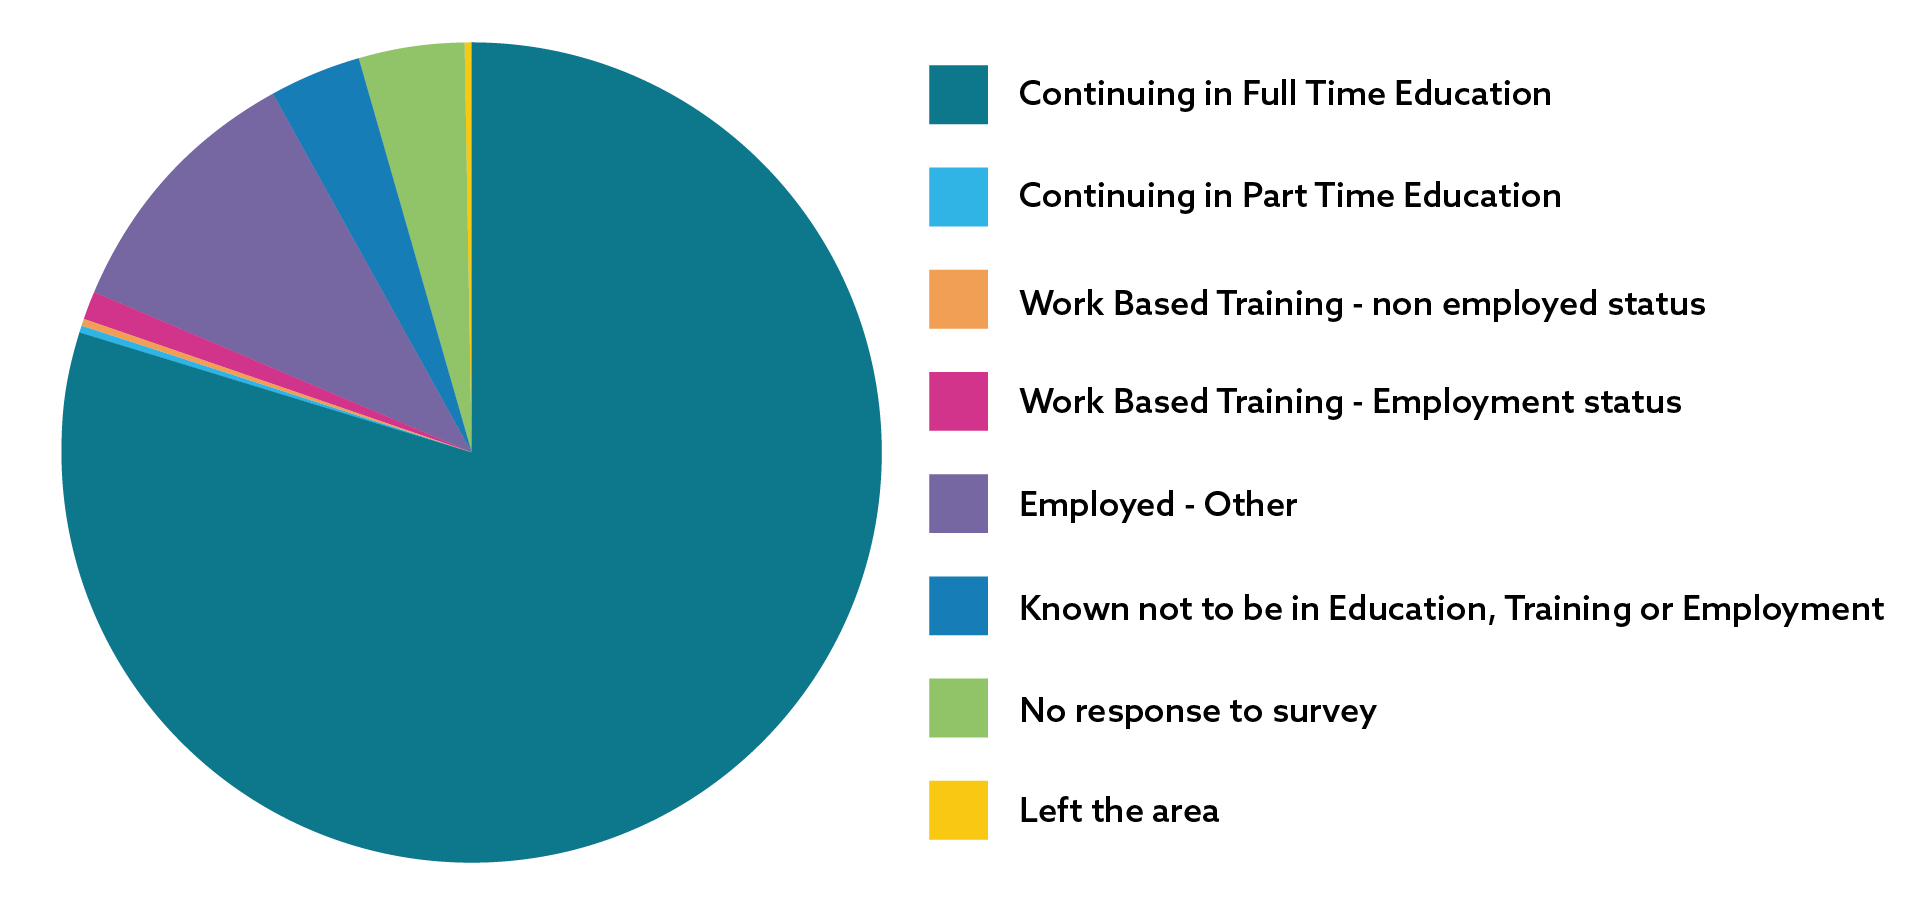 Pie chart indicating the number of pupils in each outcome. Full explanation of all data can be found in the table below